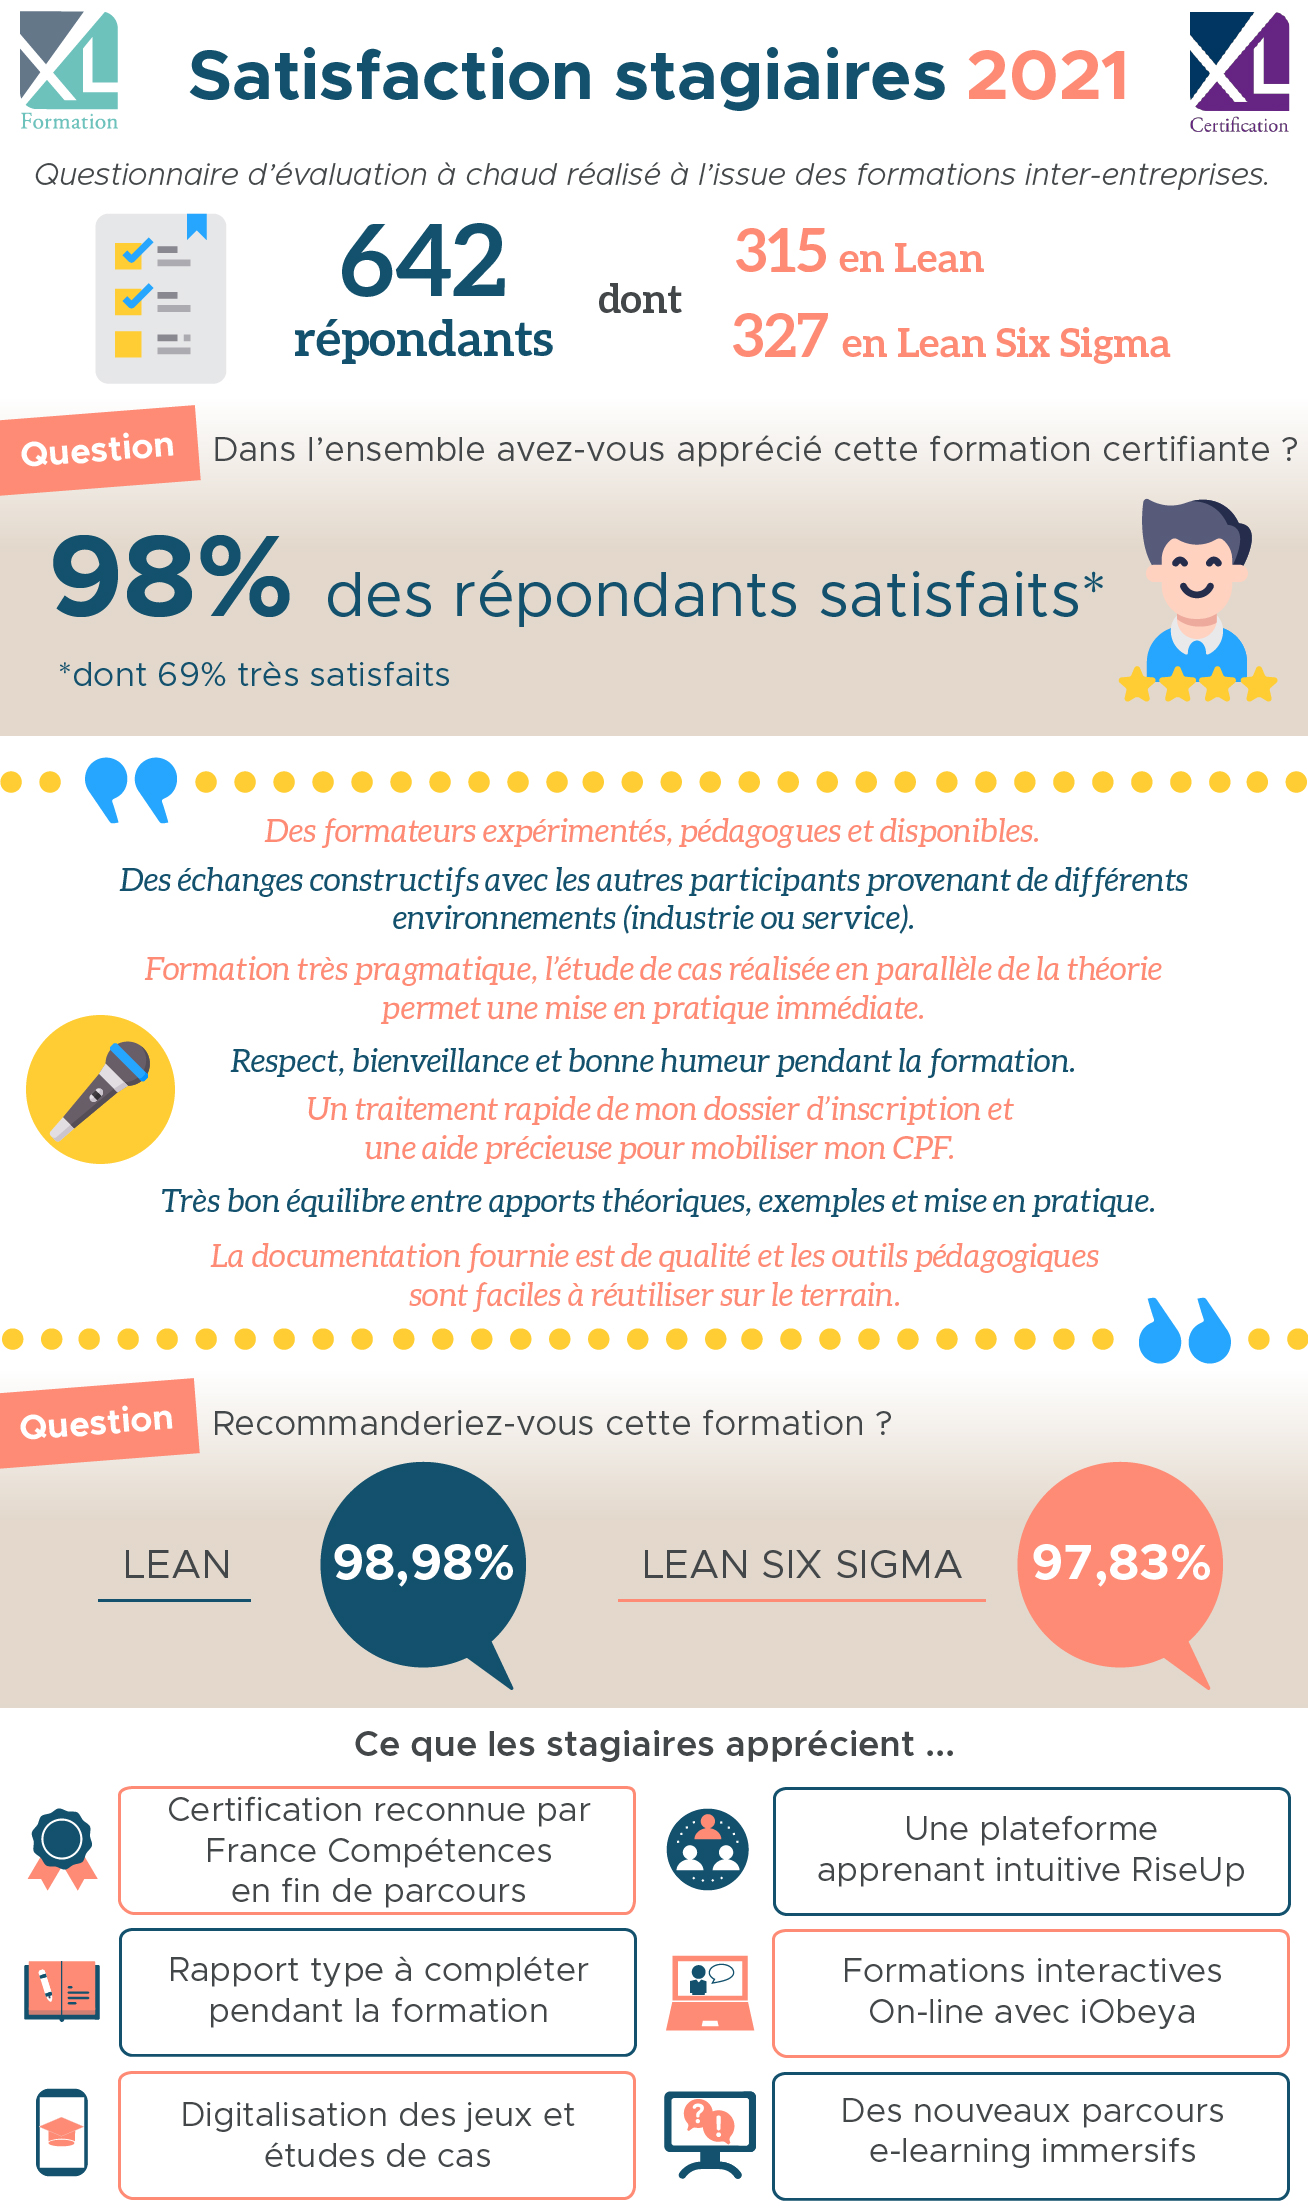 Infographie satisfaction stagiaires 2021